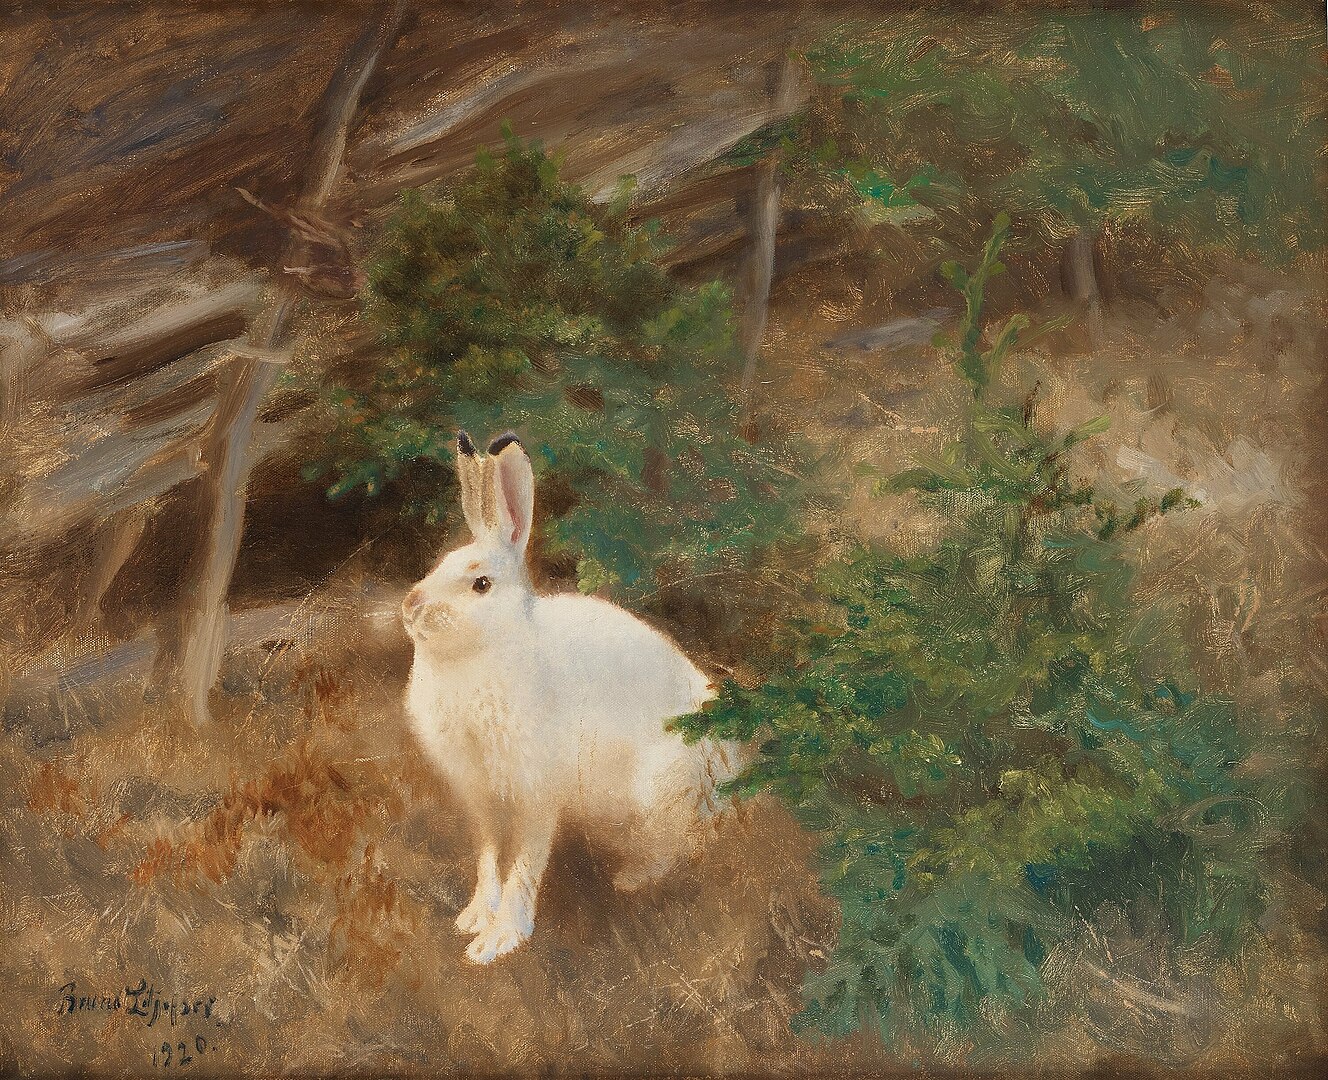 A mountain hare in a forest